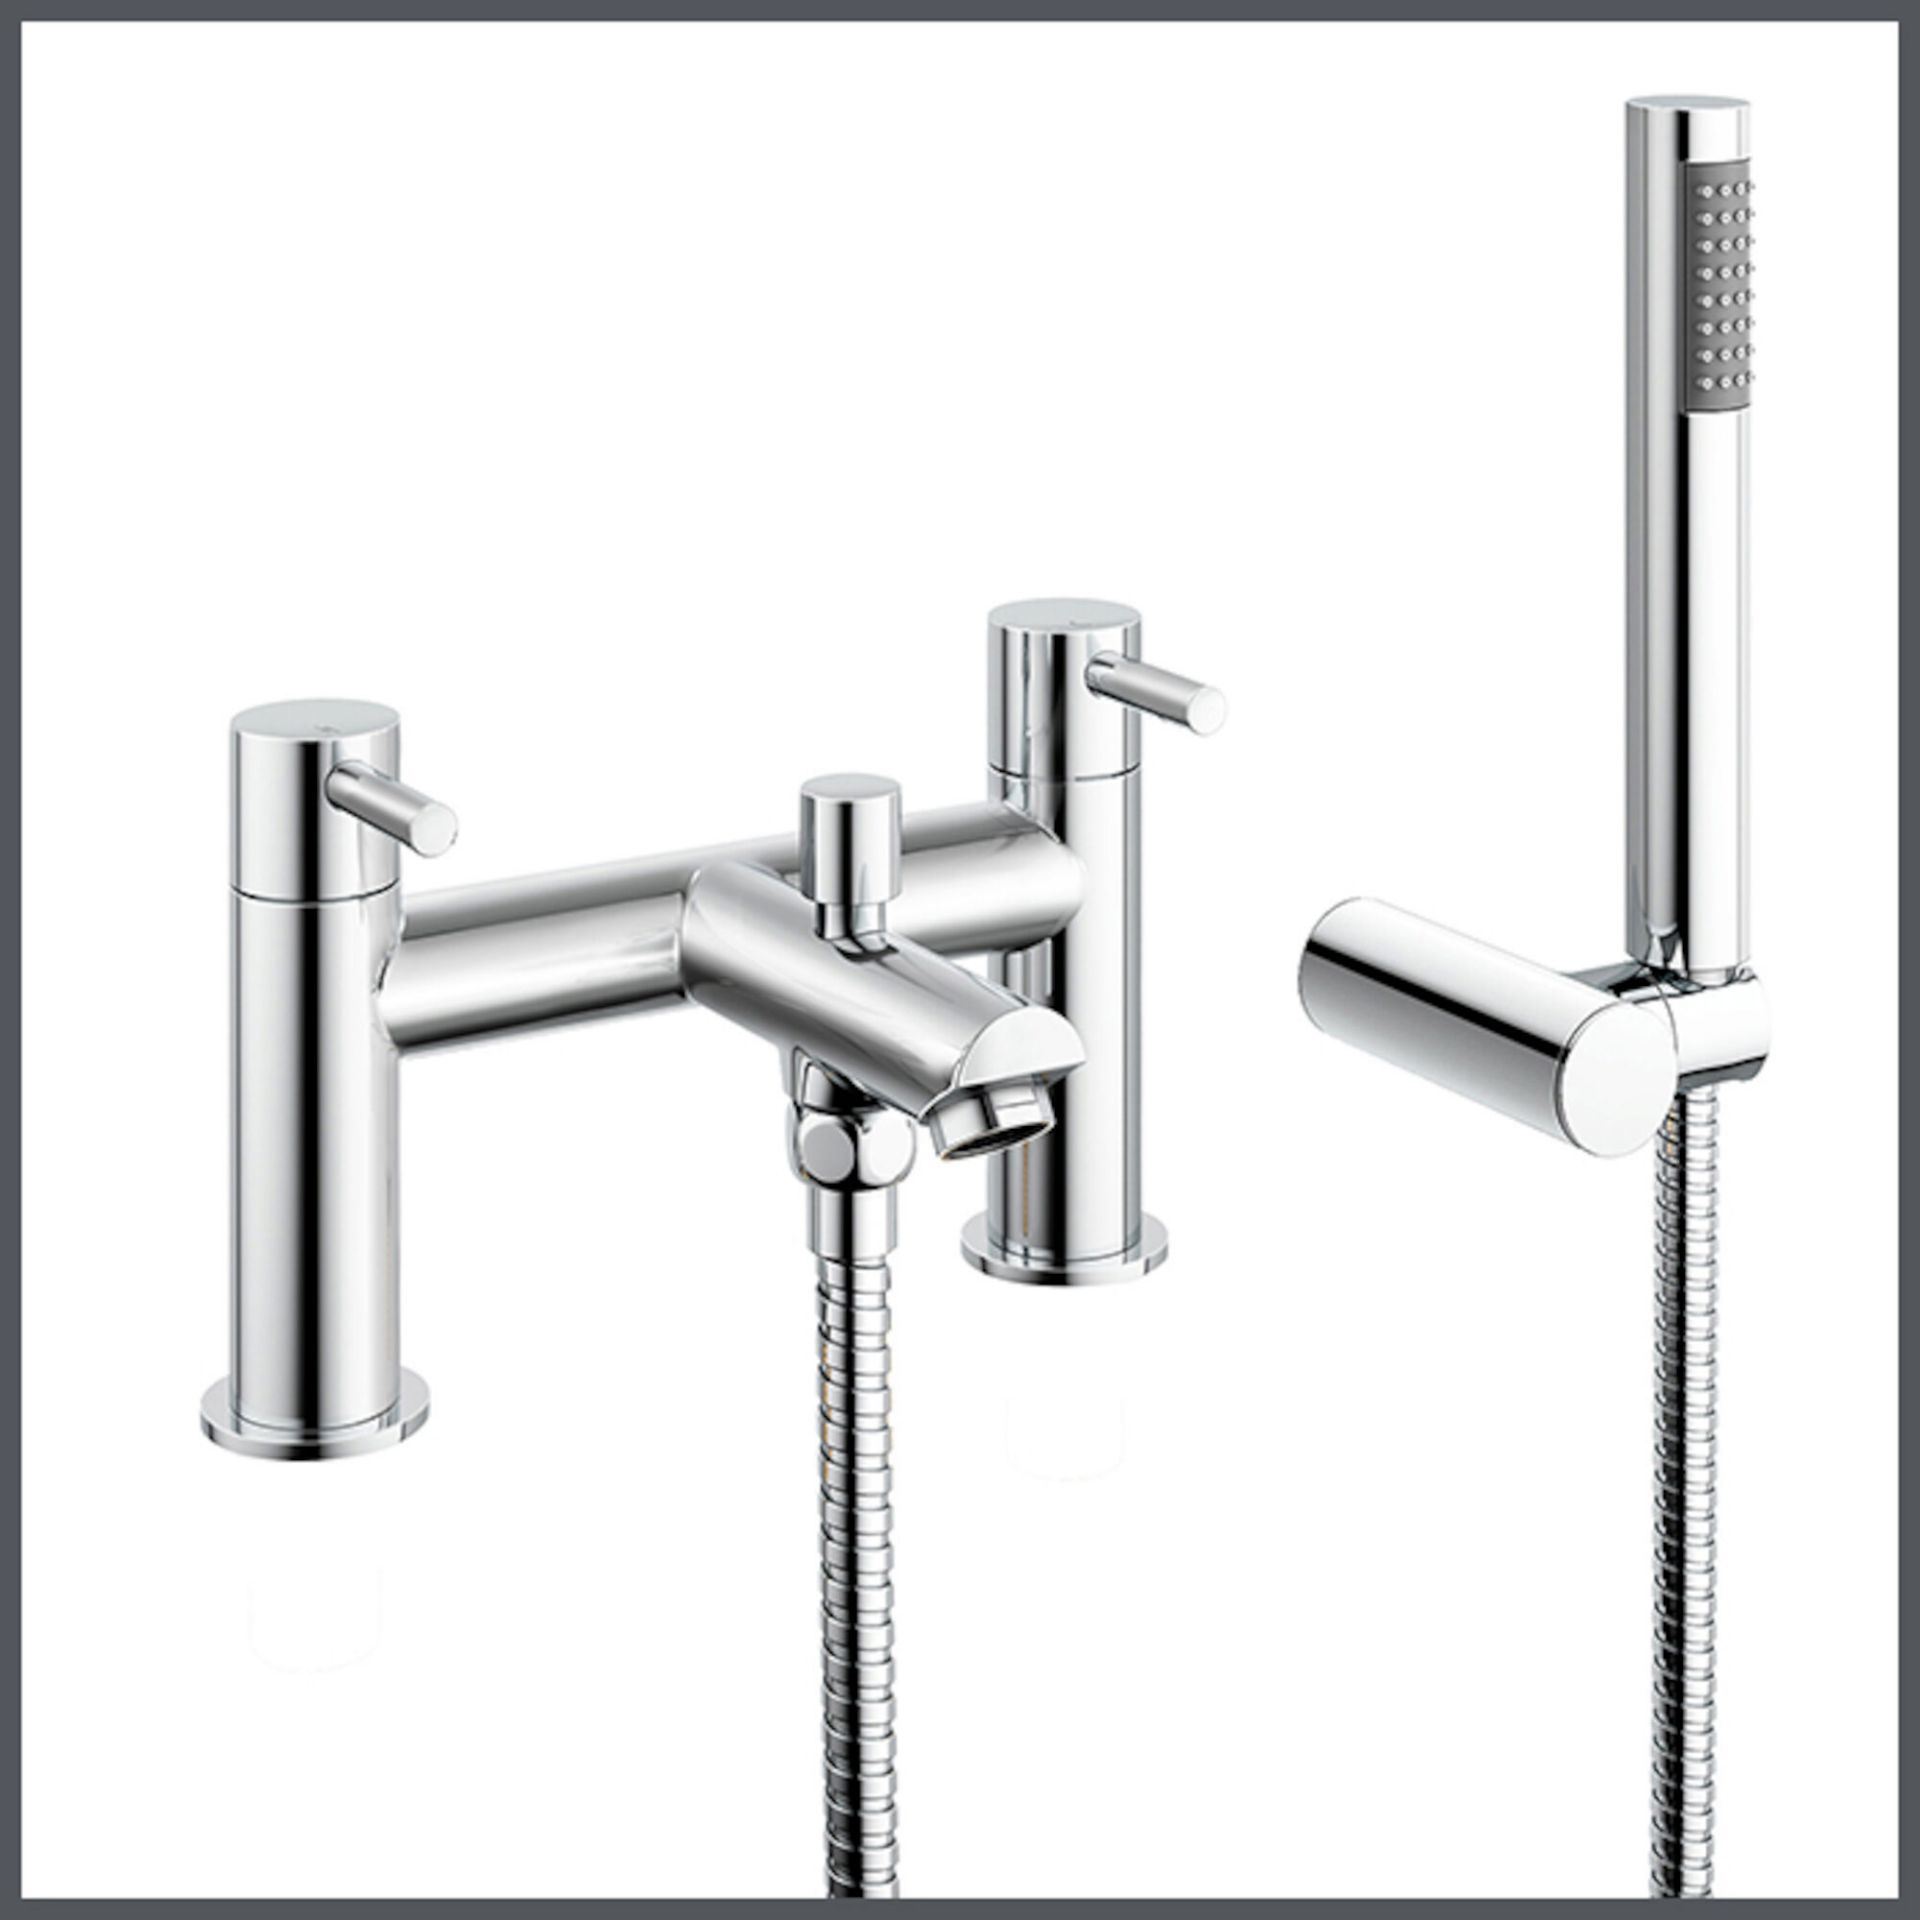 (PM1029) Bath Mixer Shower Tap & Handheld Chrome plated solid brass 1/4 turn solid brass val...